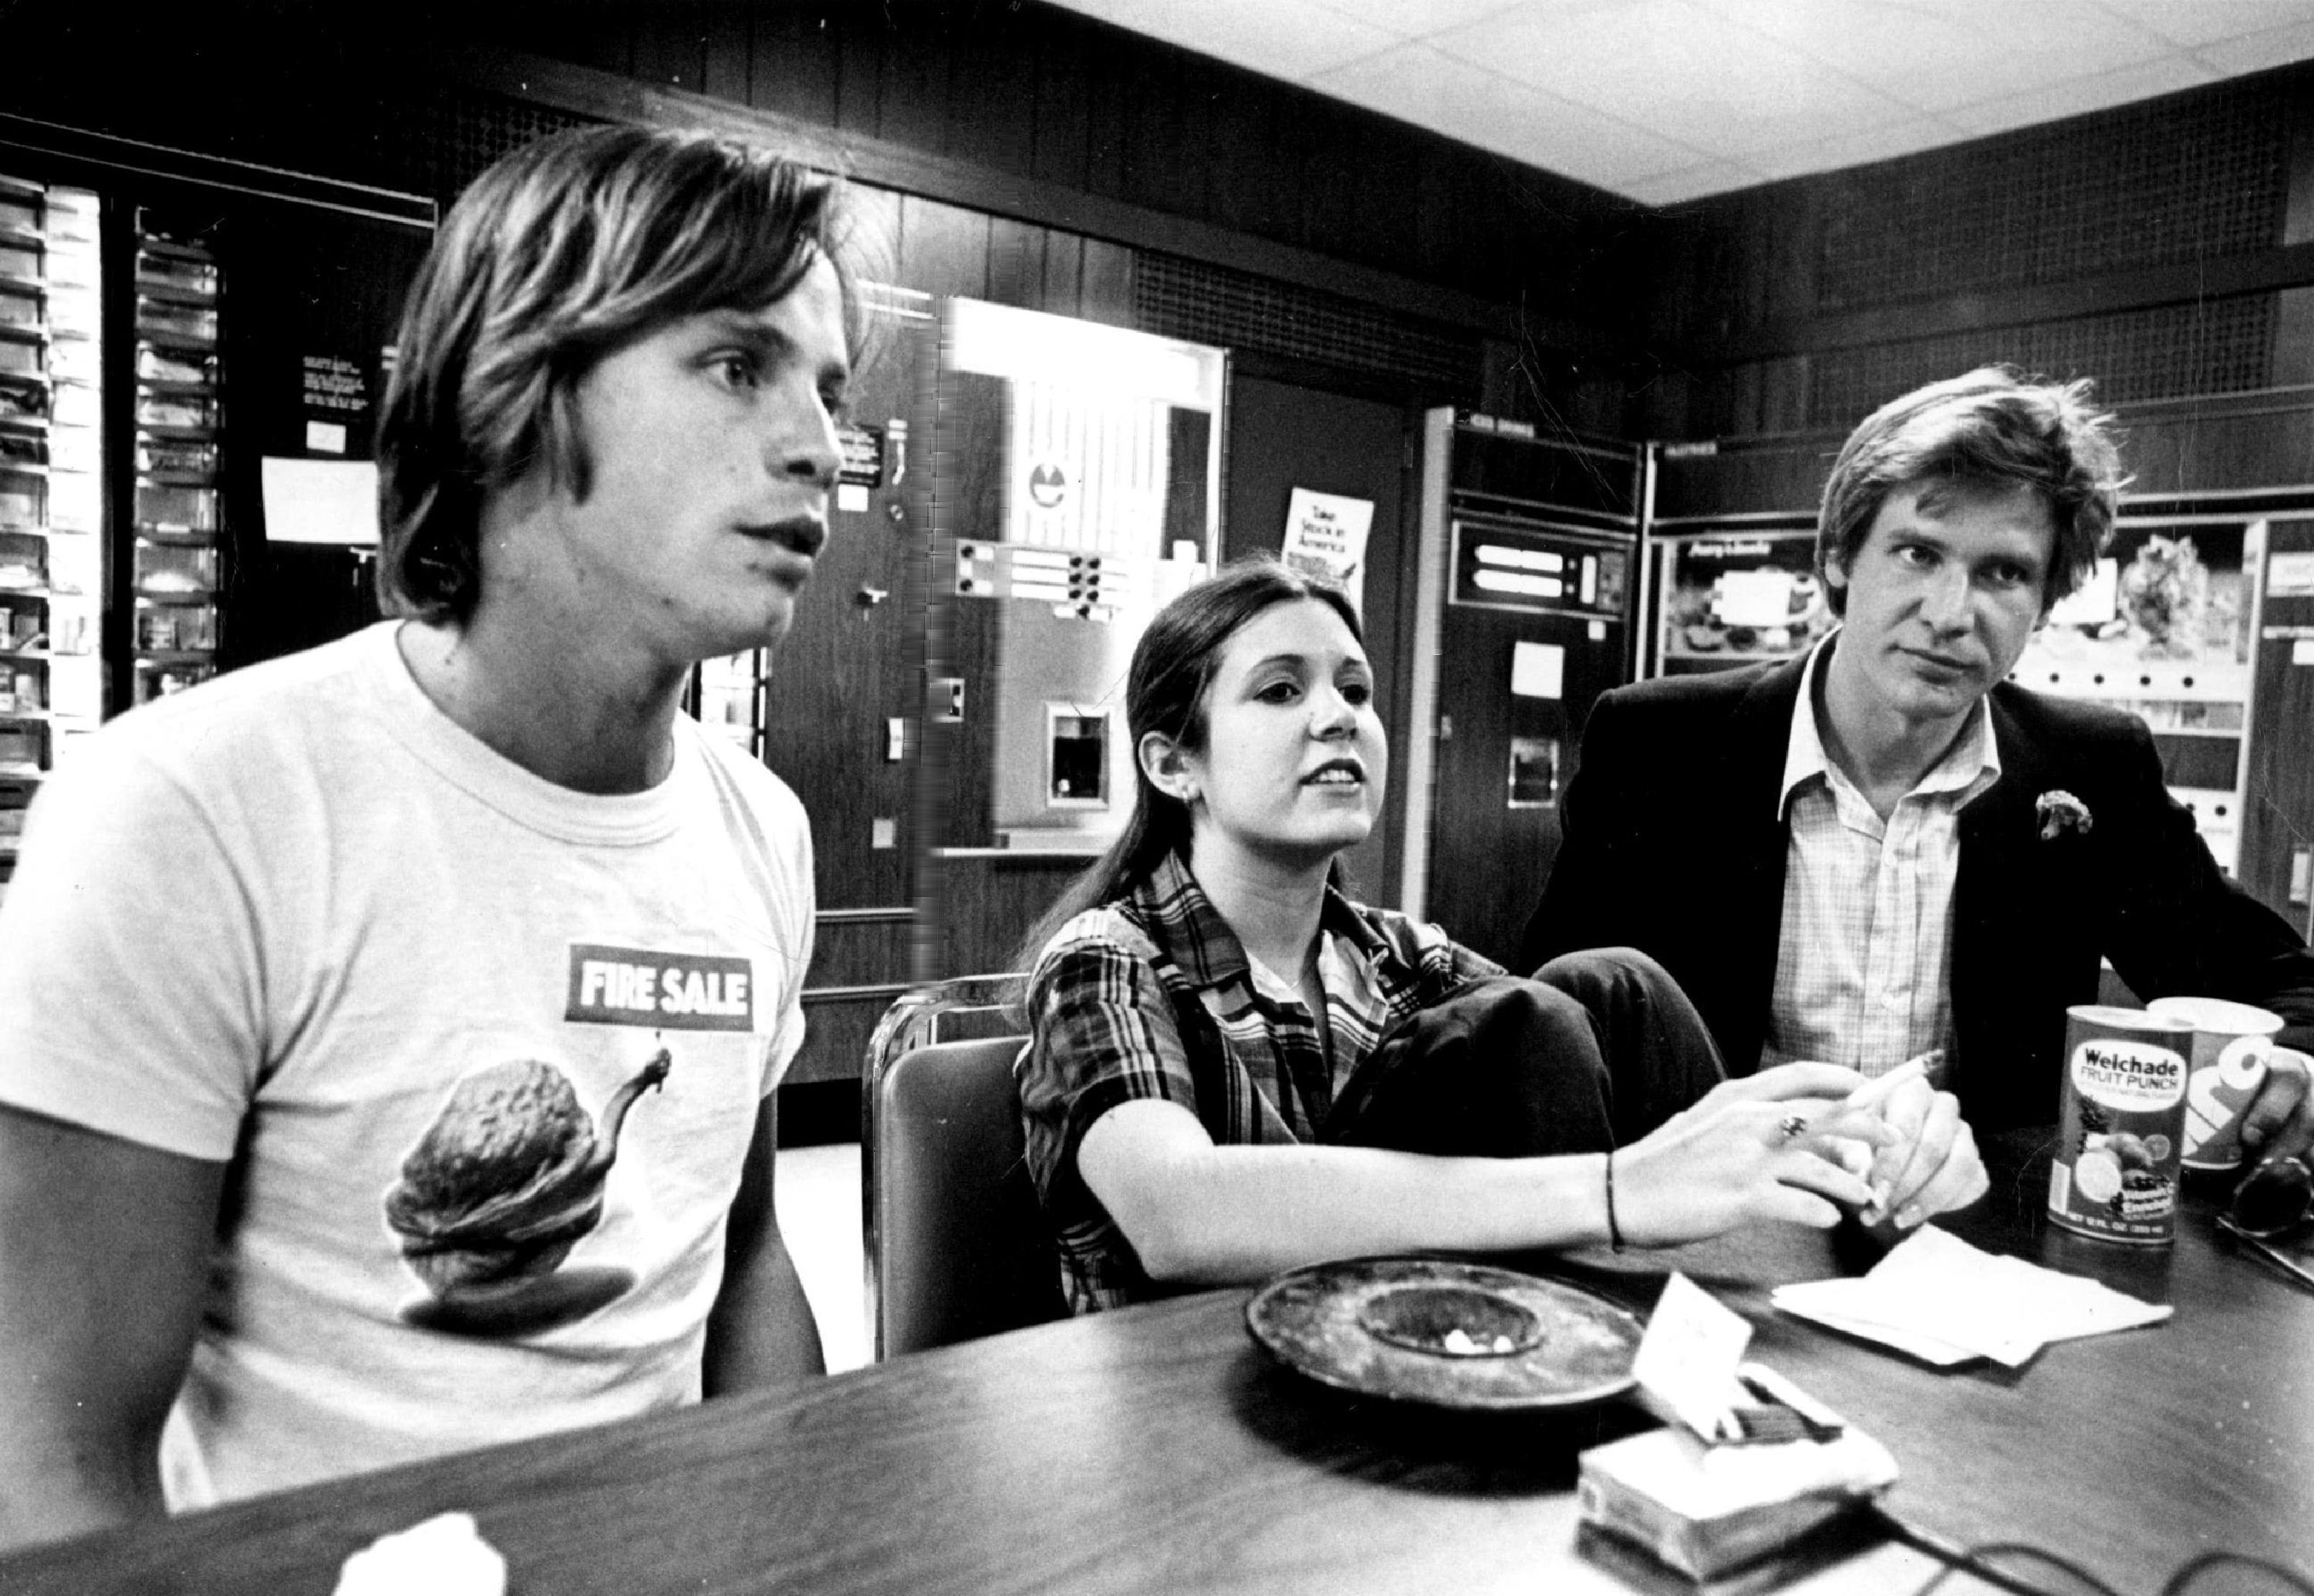 JUN 15 1977, MAY 30 1978, JUN 4 1978; 'Star Wars' has Given three Performers that 'All-Important Break'; Featured in the popular science fantasy movie are, from left, Mark Hamill, Carrie Fisher and Harrison Ford.;  (Photo By Steve Larson/The Denver Post via Getty Images)